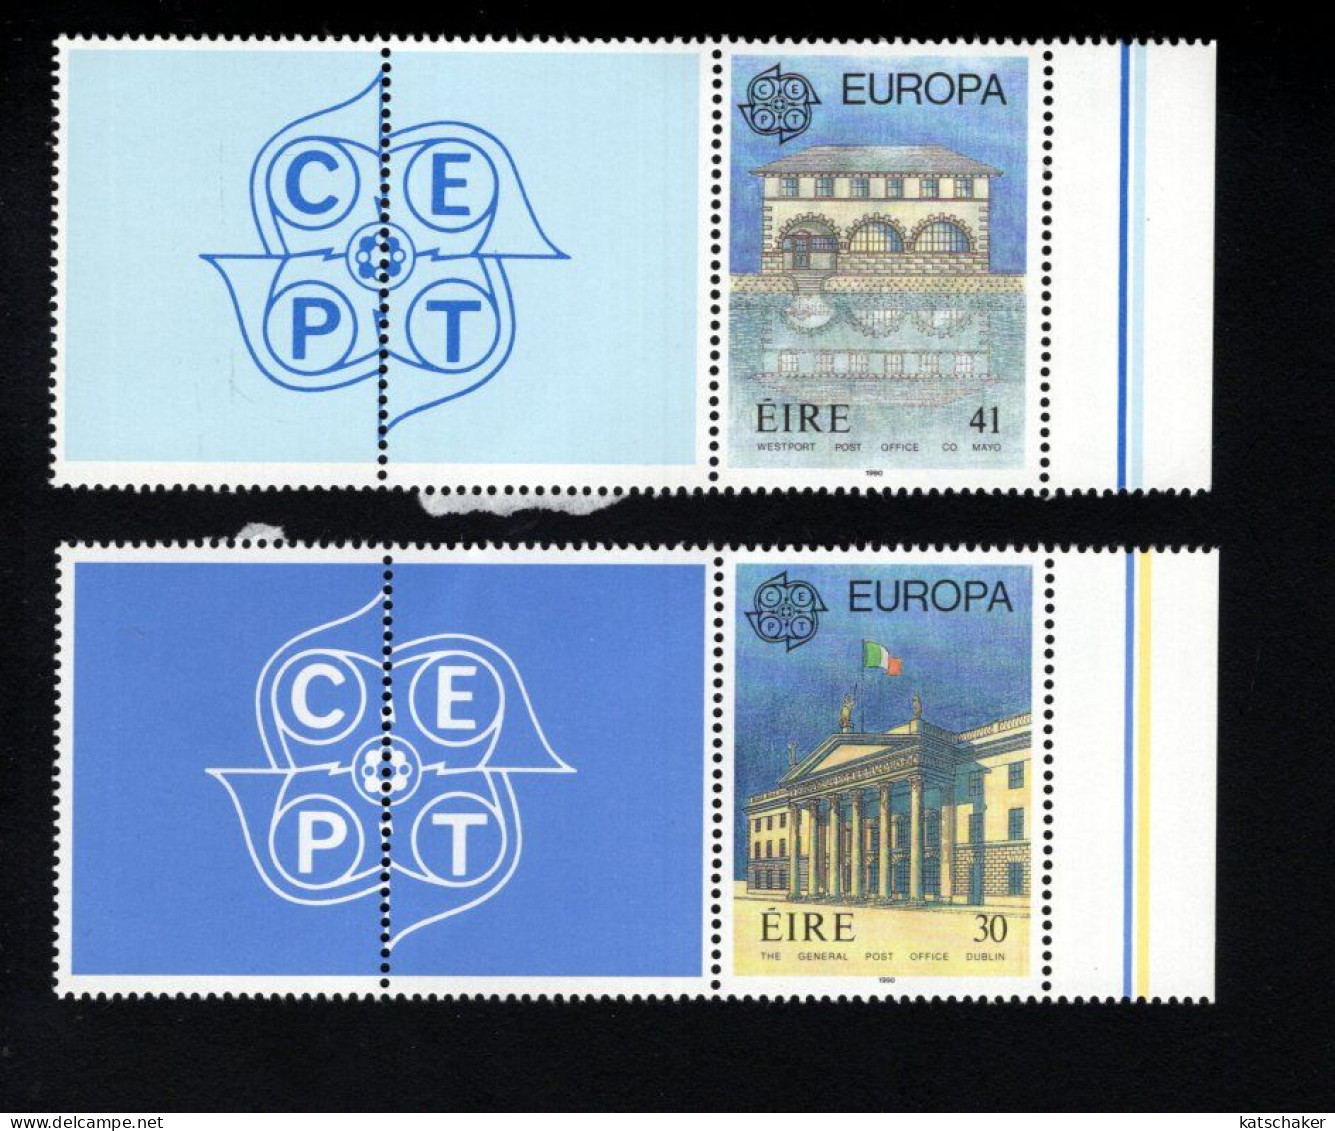 1992723689 1990 SCOTT 805 806  (XX) POSTFRIS MINT NEVER HINGED   -  EUROPA ISSUE - POST OFFICES + LABELS FROM SHEET - Ungebraucht